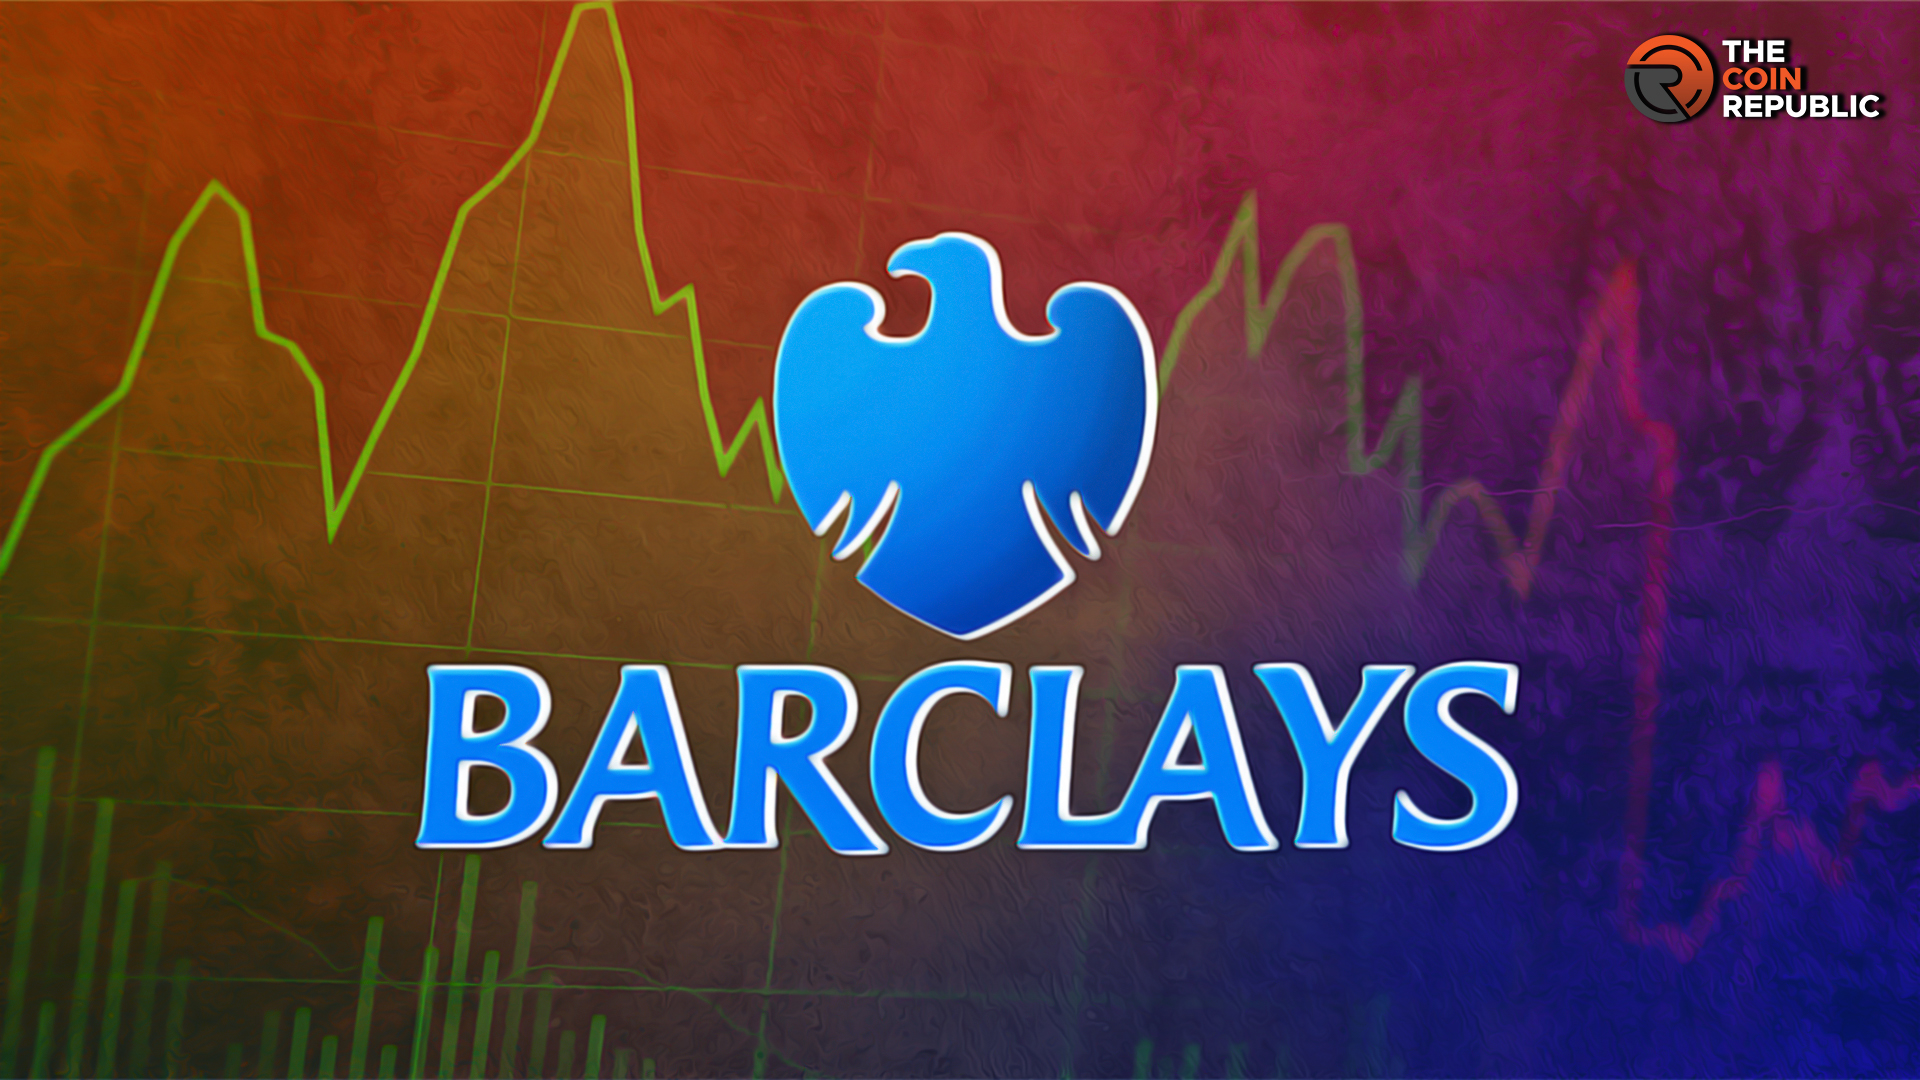 BARC Stock: Will Barclays Stock Break Above the 166 GBX Level?